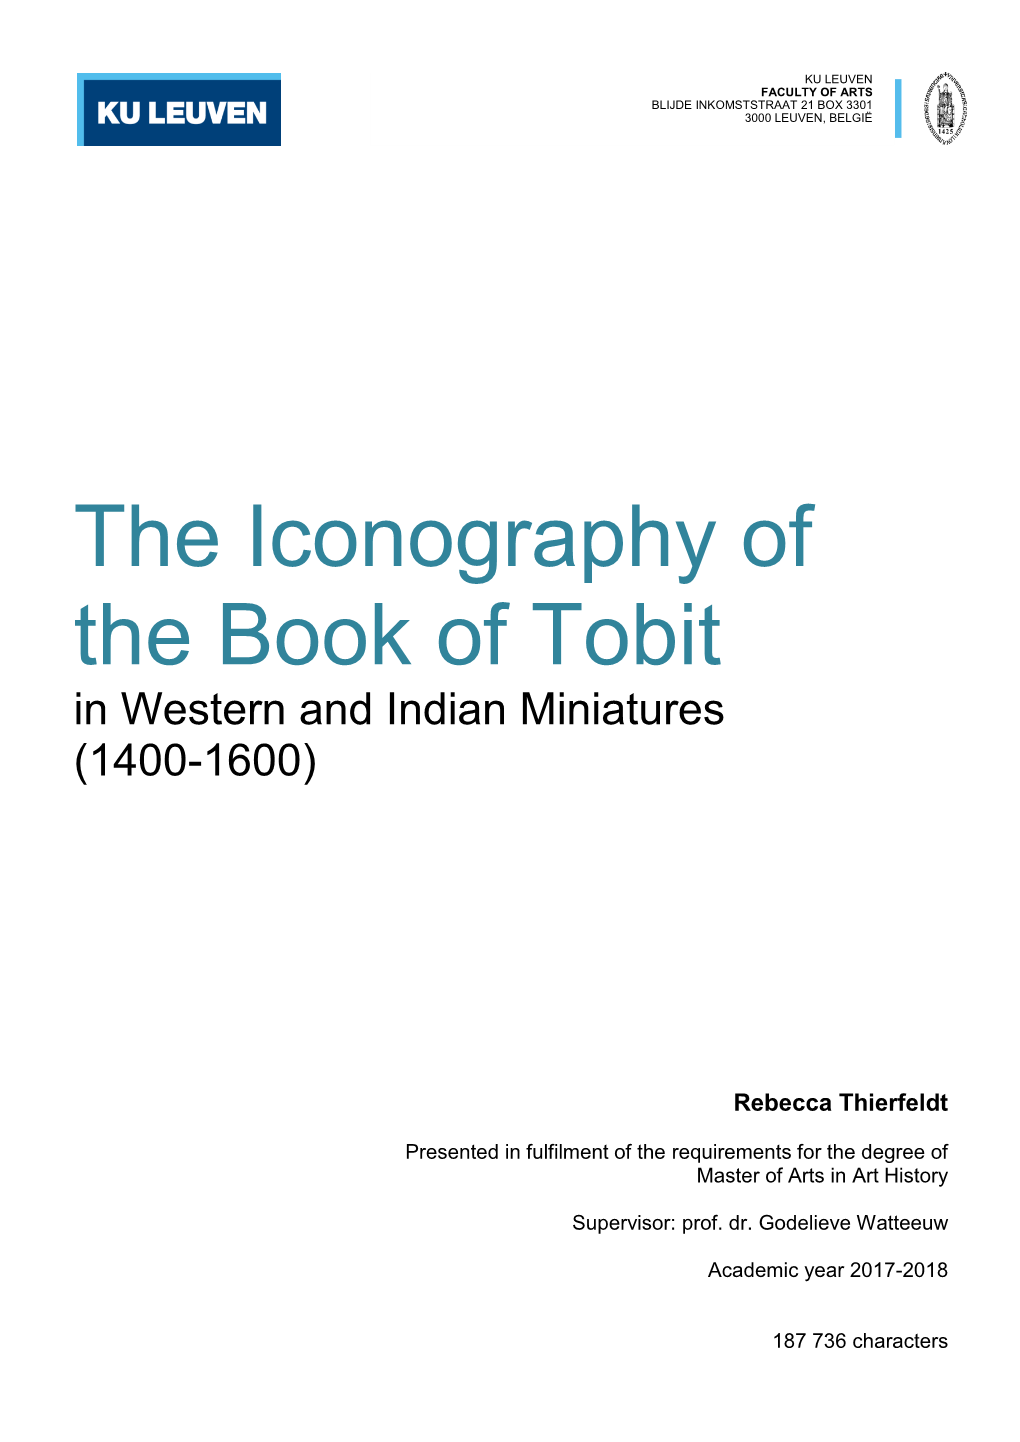 The Iconography of the Book of Tobit in Western and Indian Miniatures (1400-1600)